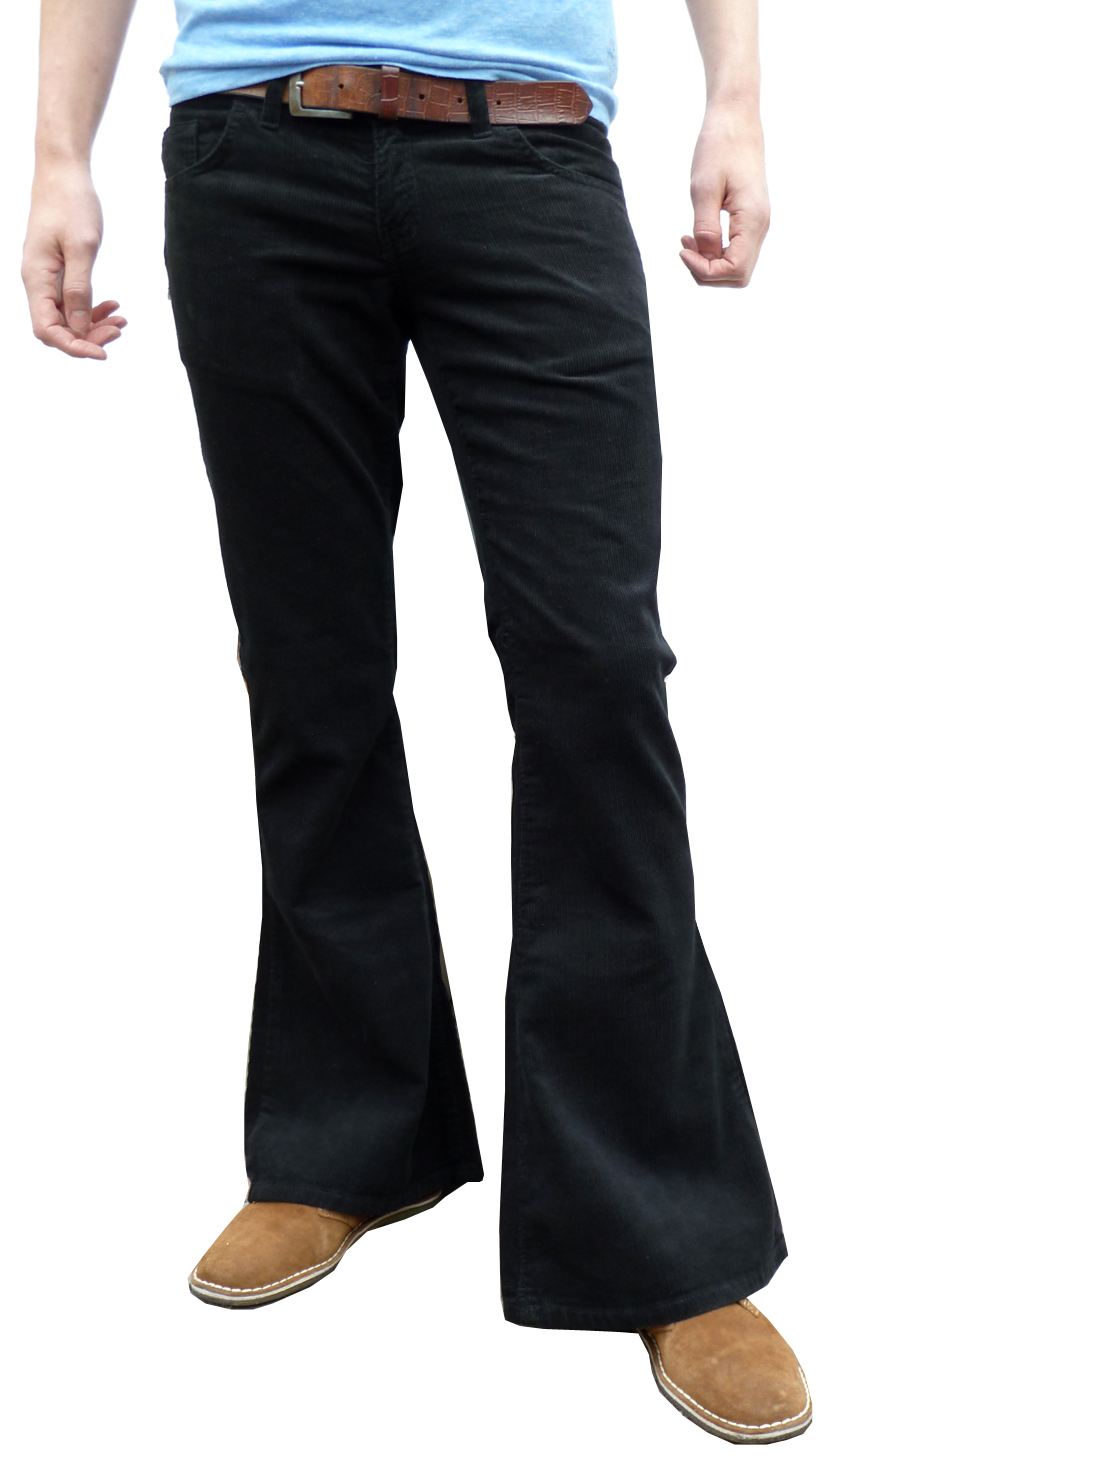 Mens Flares Black Corduroy Flared Bell Bottoms Pants Hippie indie 70s 60s Outfit - Pants